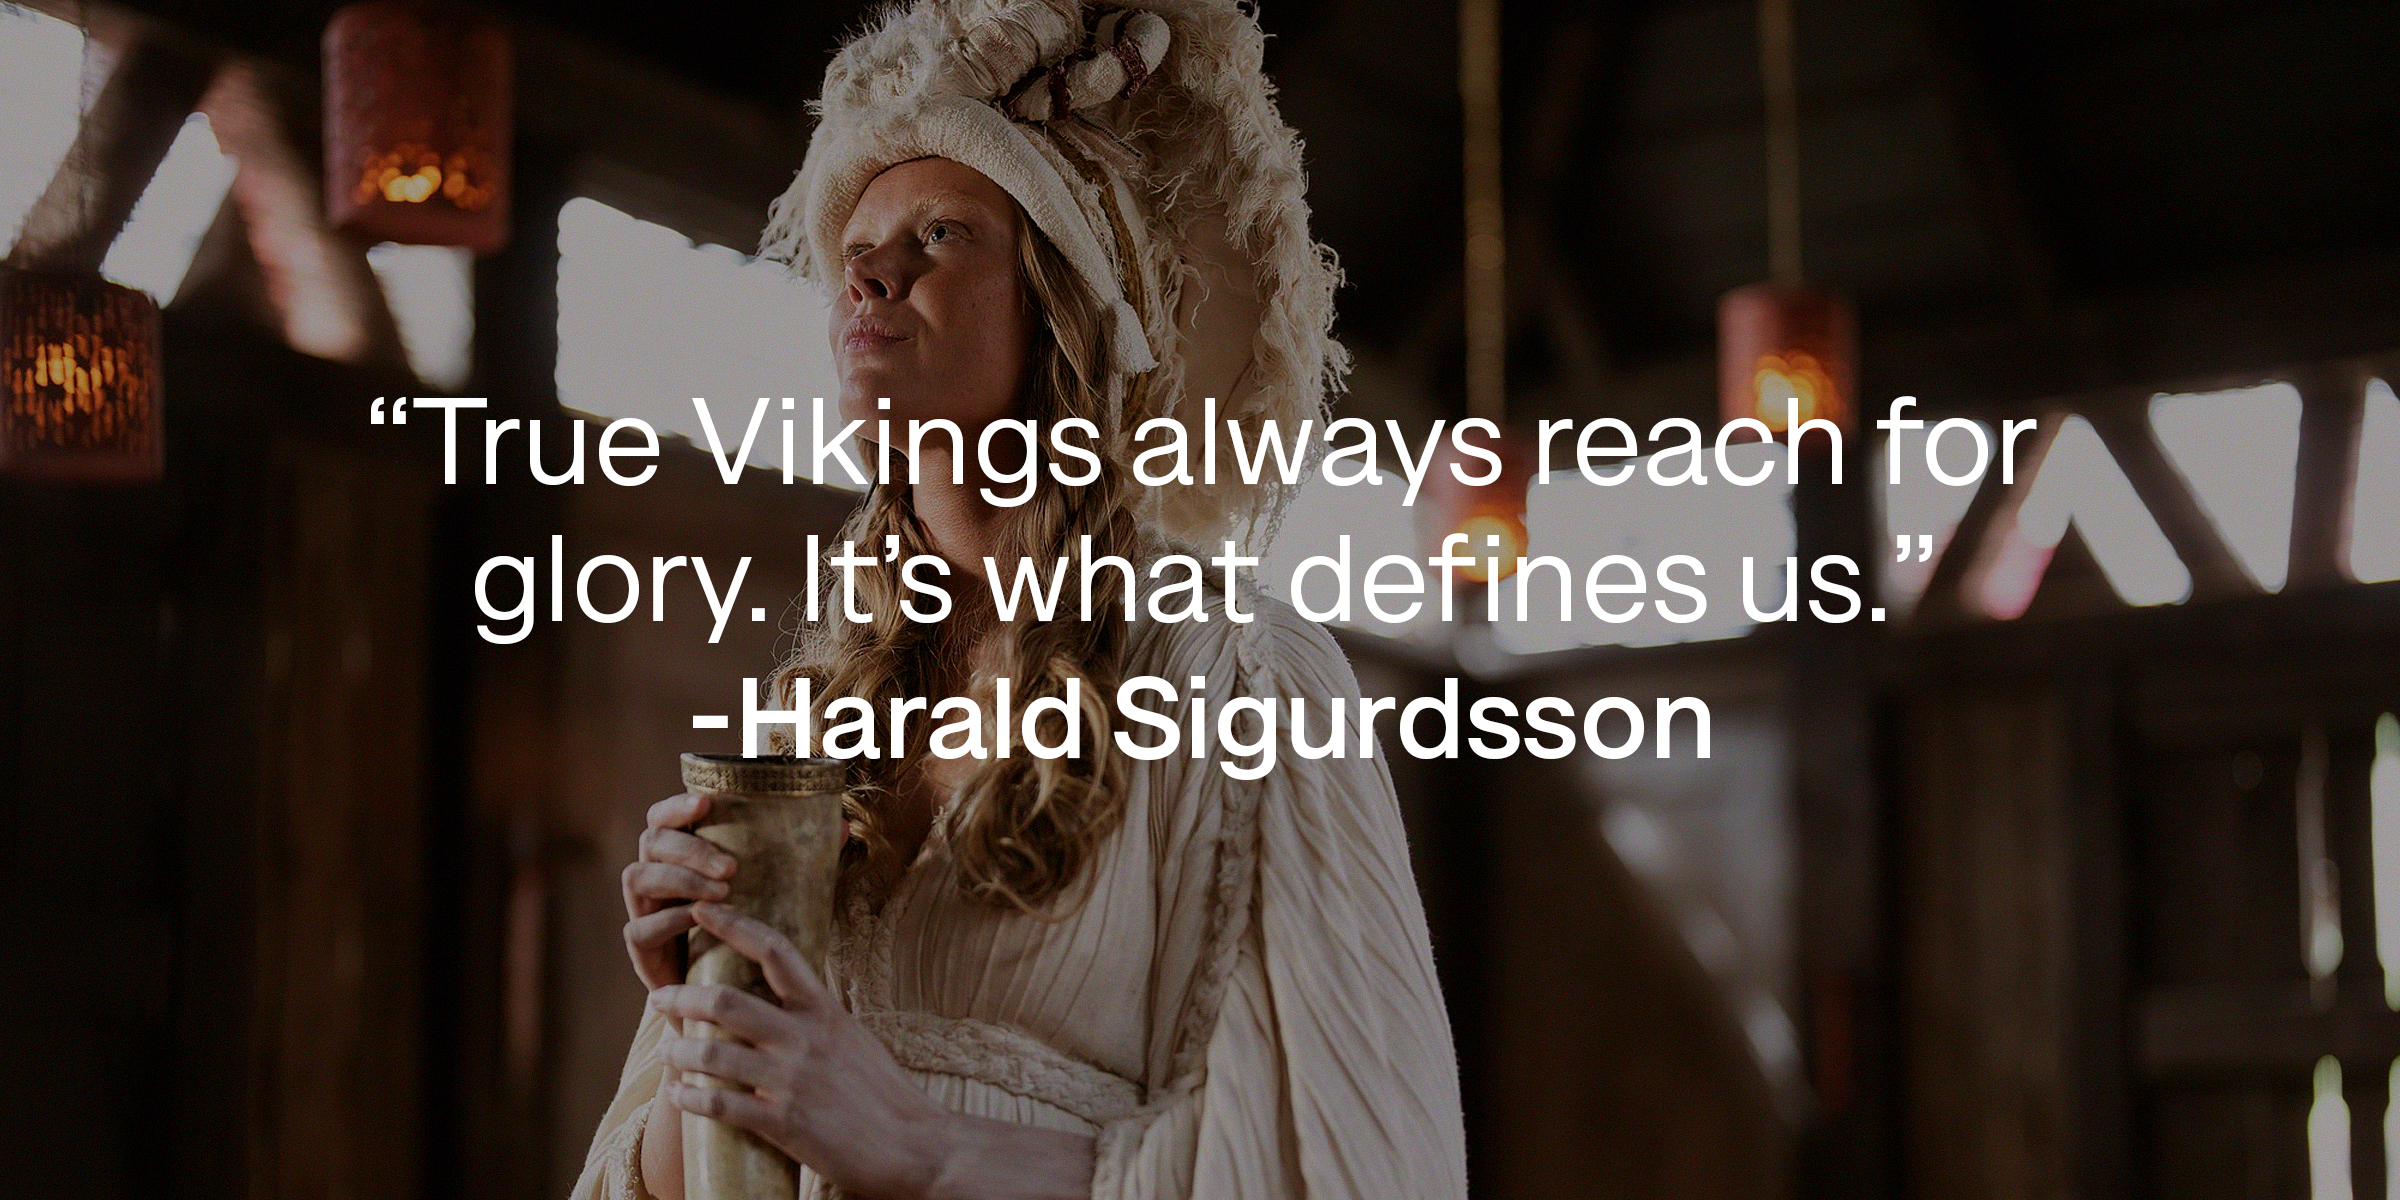 Harald Sigurdsson with his quote: "True Vikings always reach for glory. It's what defines us."┃Source: facebook.com/netflixvalhalla